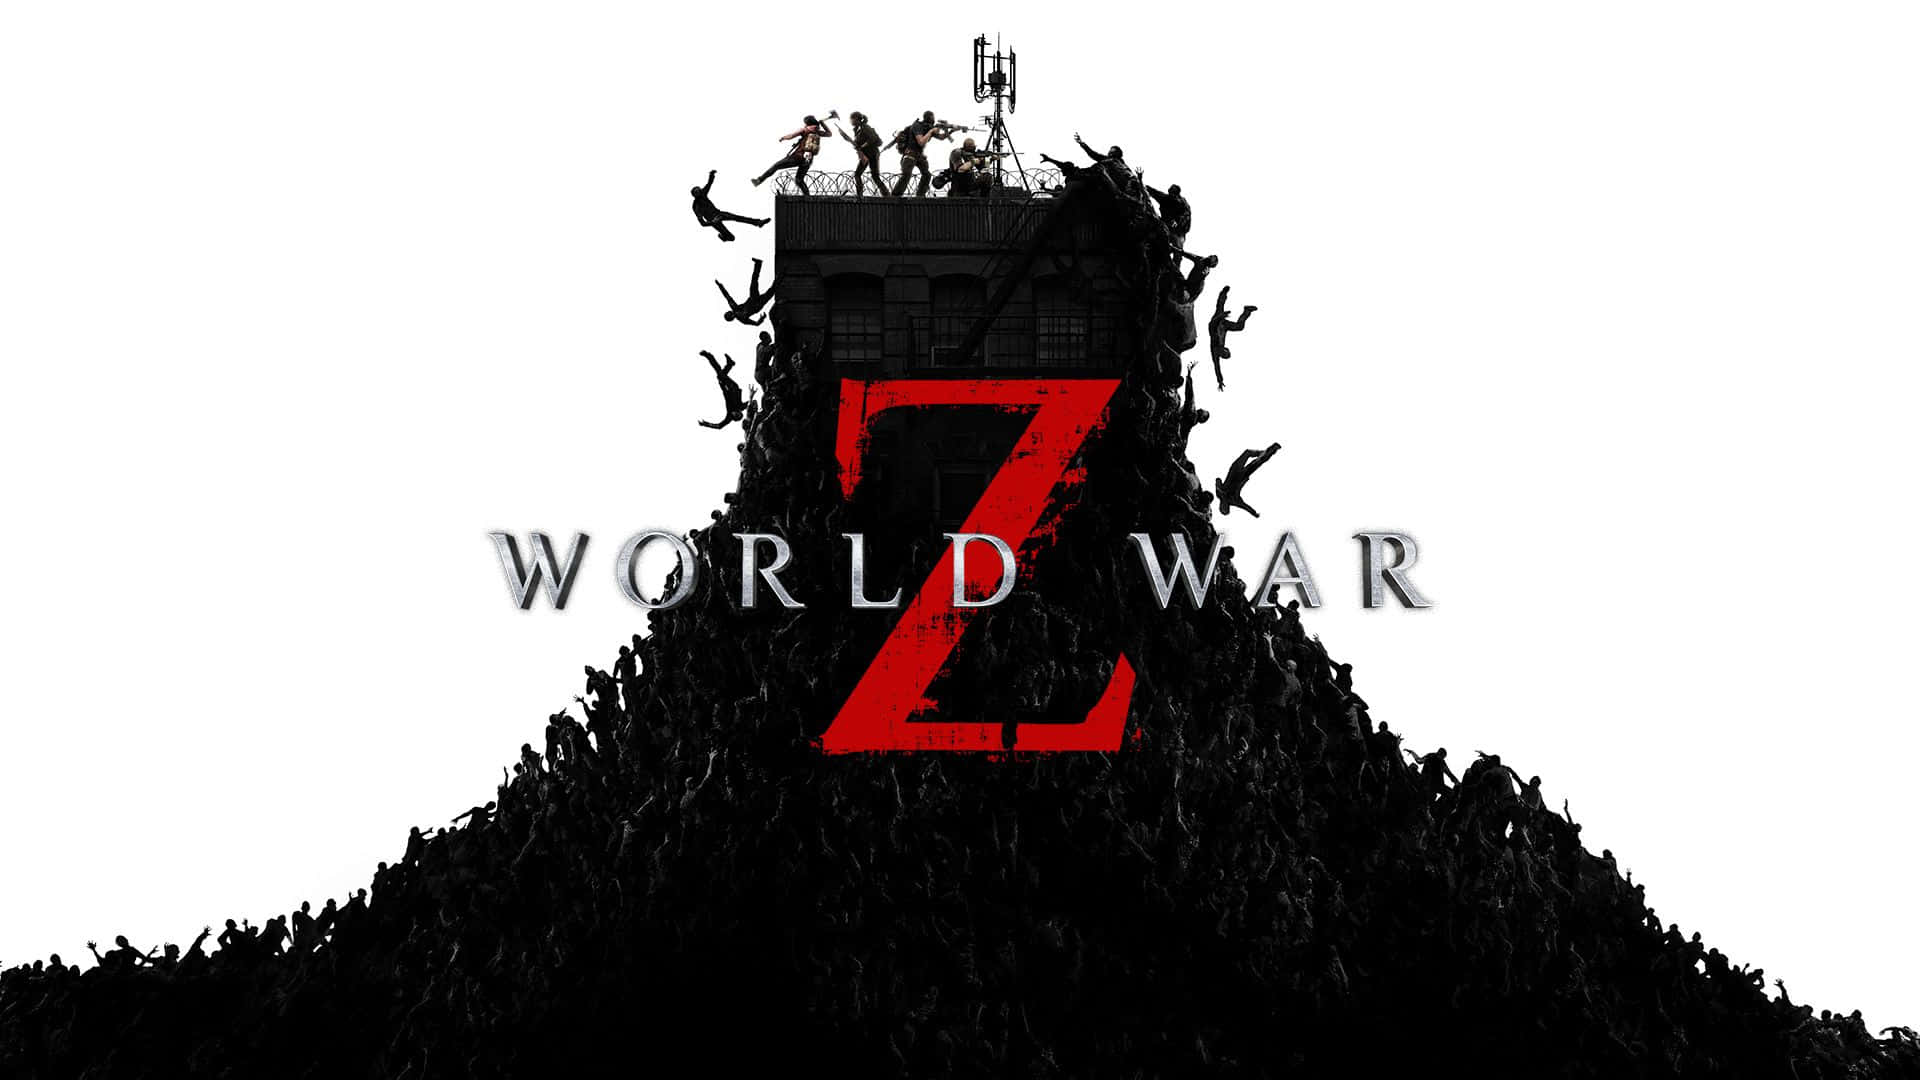 Download Brad Pitt at the height of battle in World War Z | Wallpapers.com